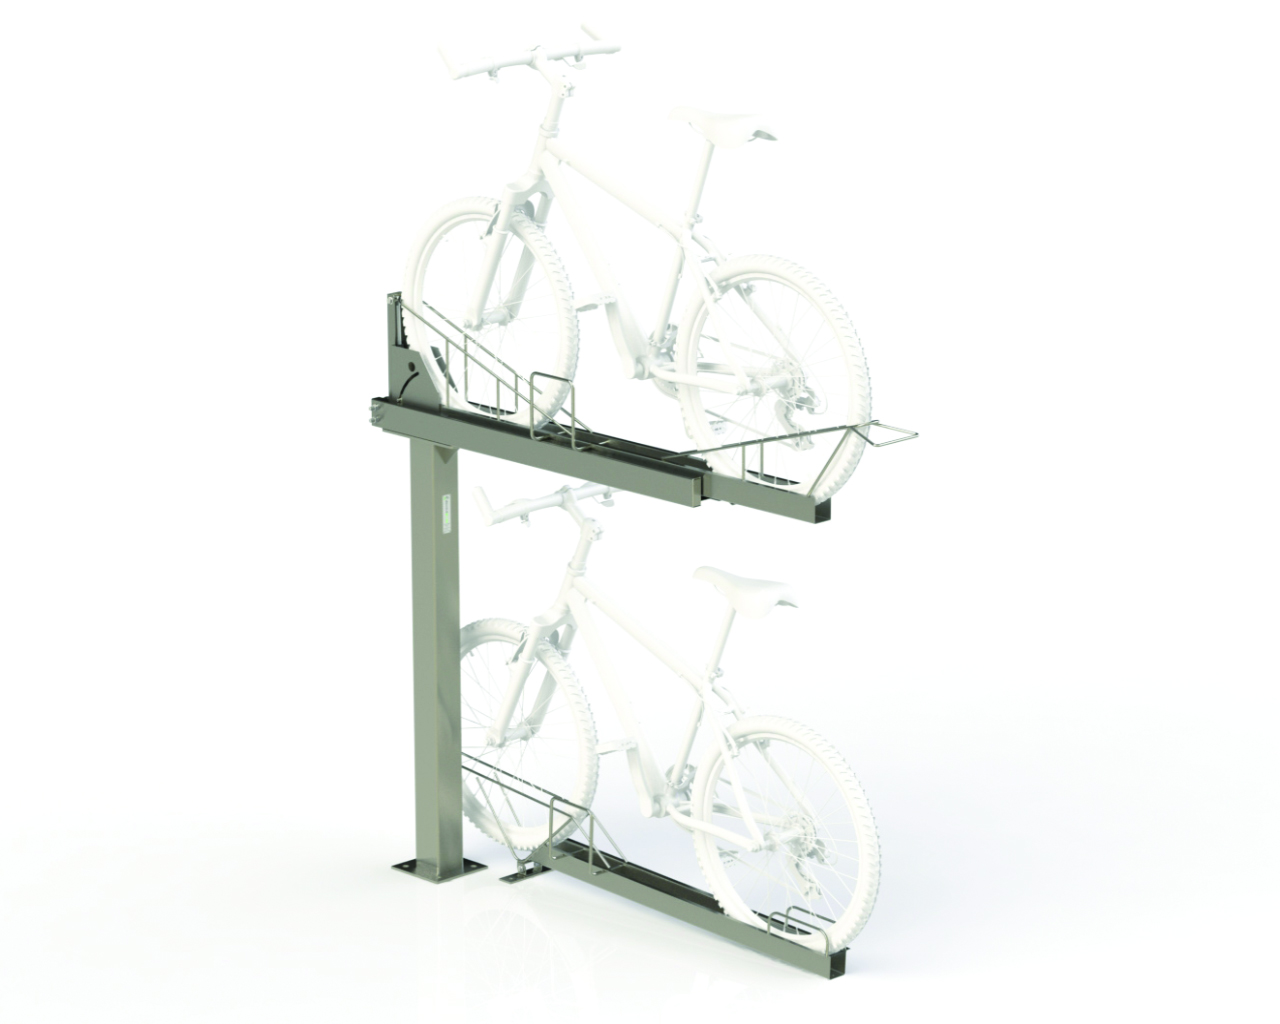 two tier bicycle rack